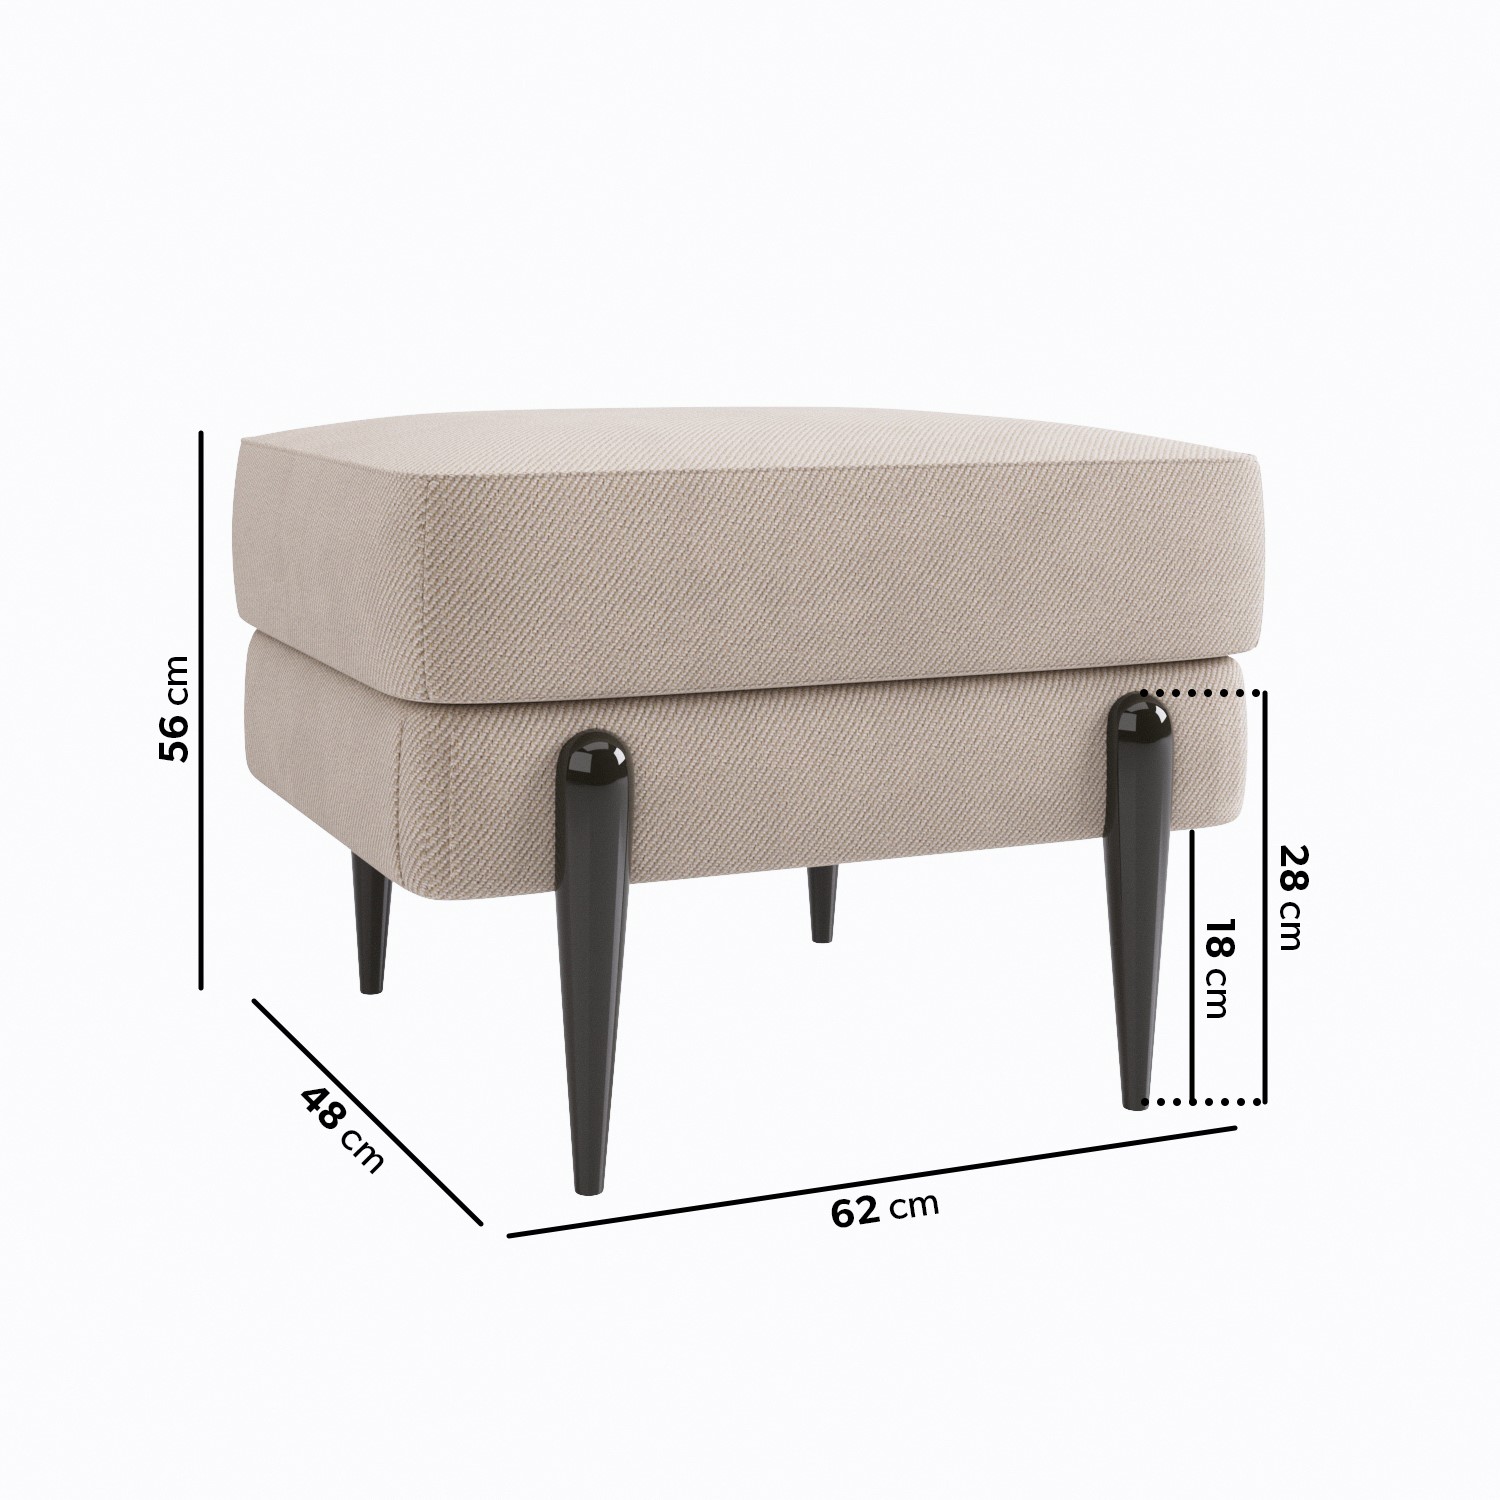 Read more about Small beige fabric footstool rosie